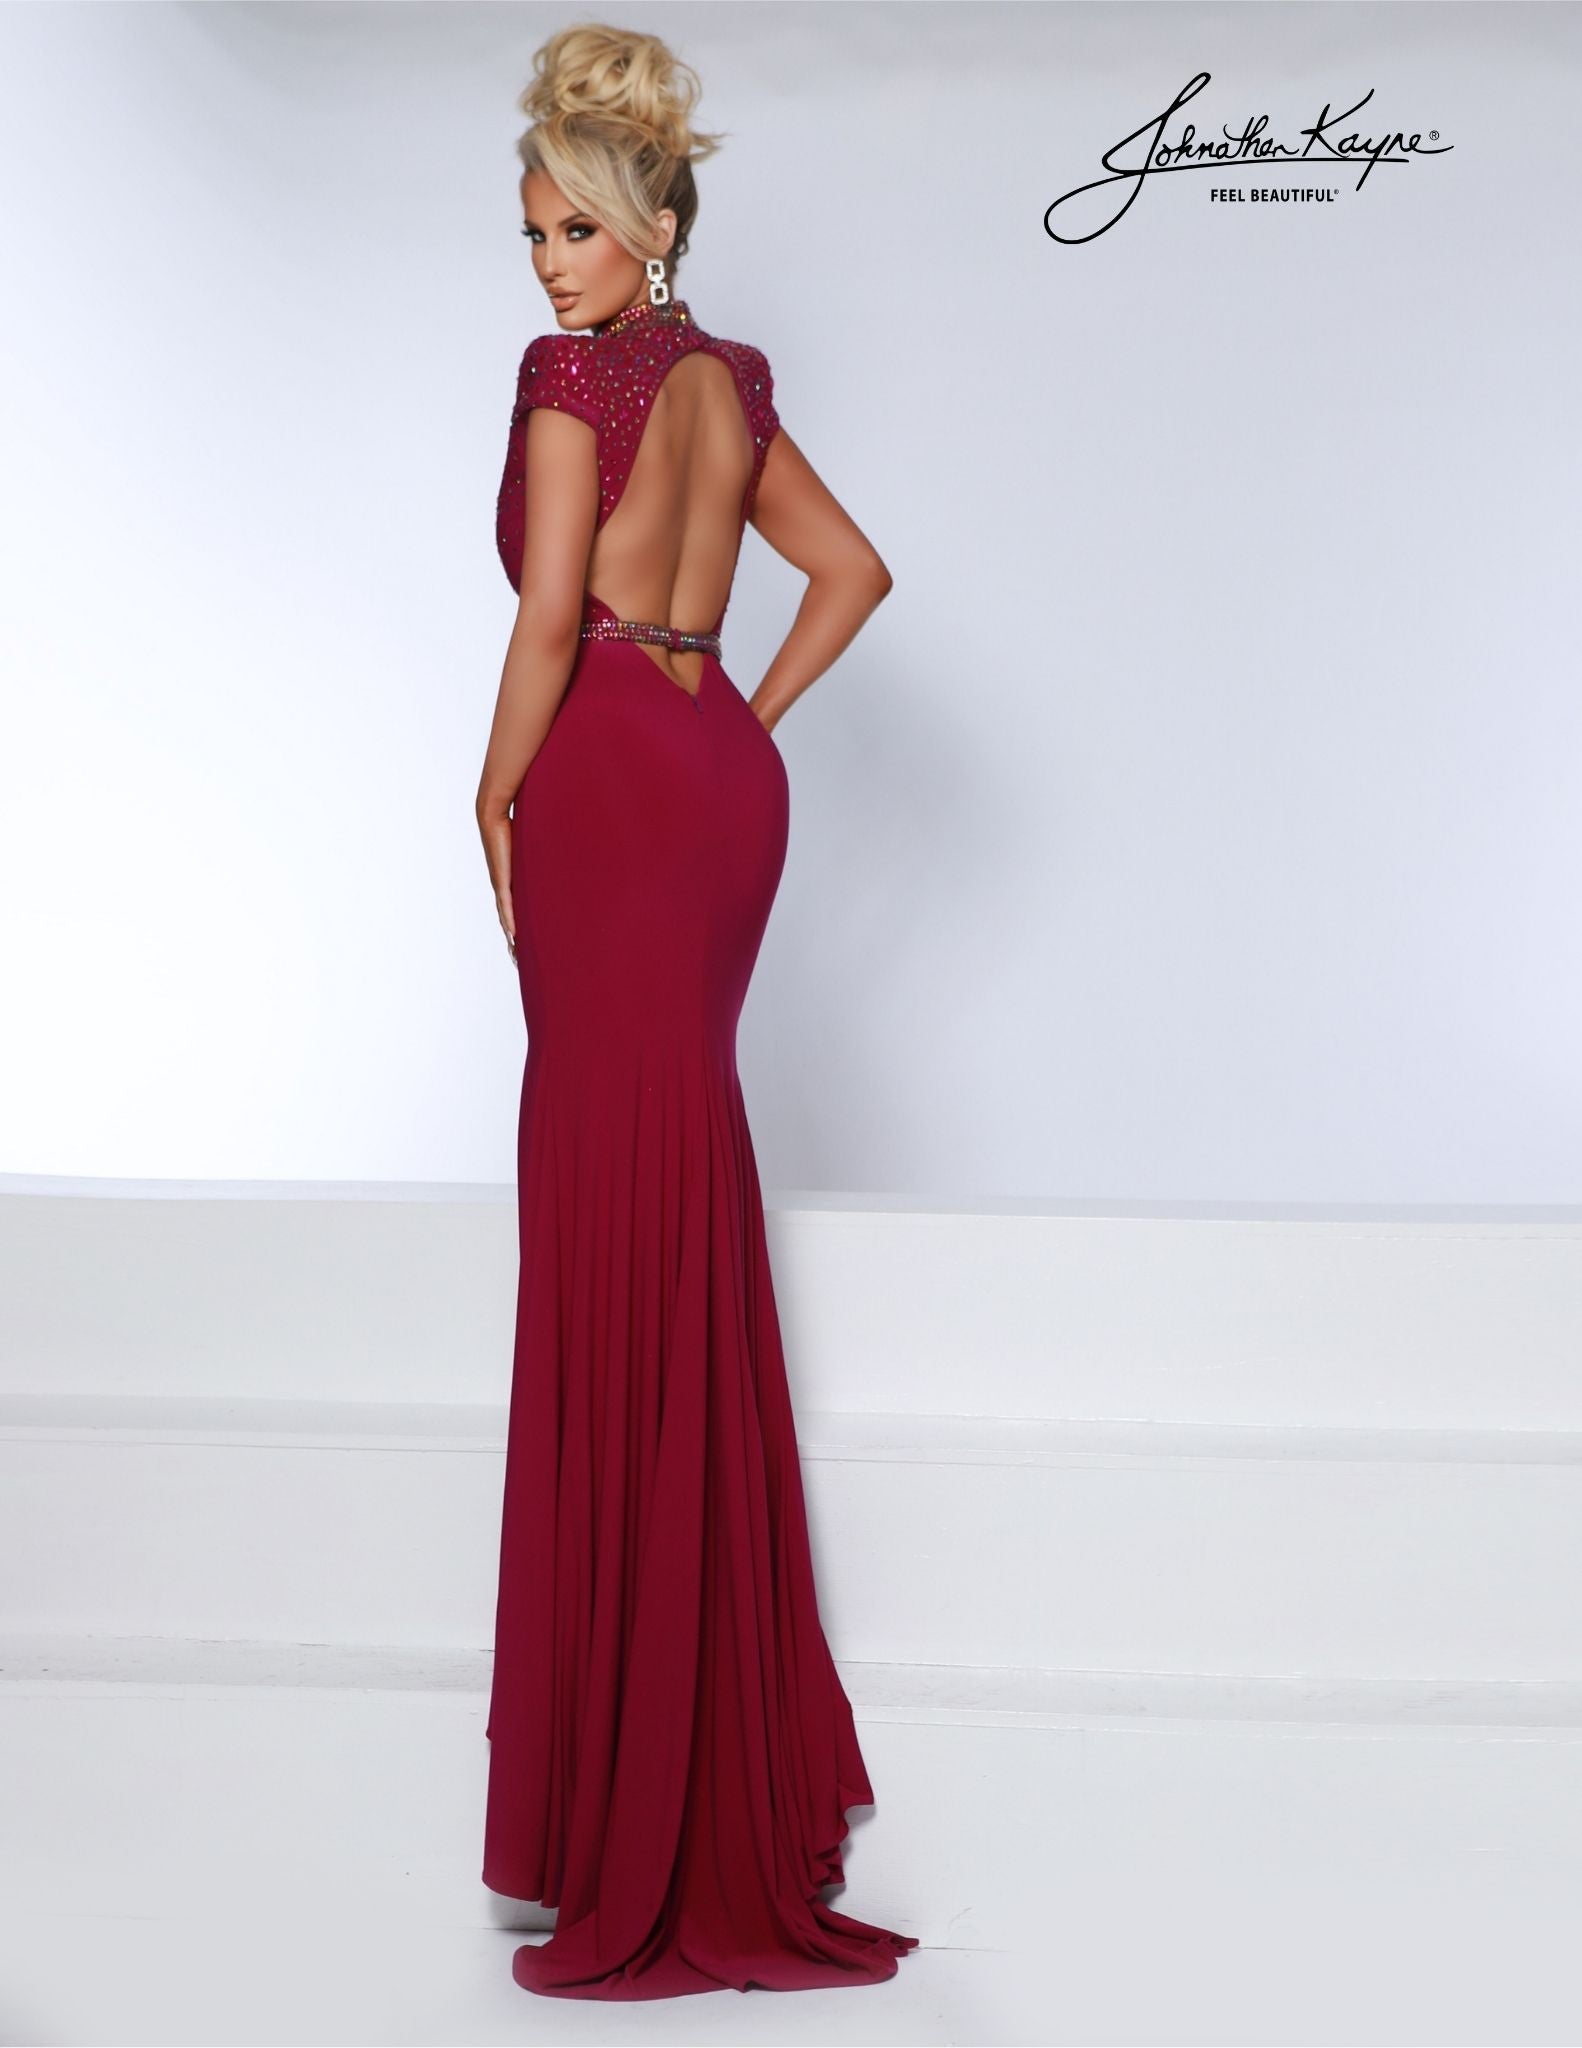 Plunge Red Jersey Gold Lace Cutout Back Dramatic Mermaid Prom Dress